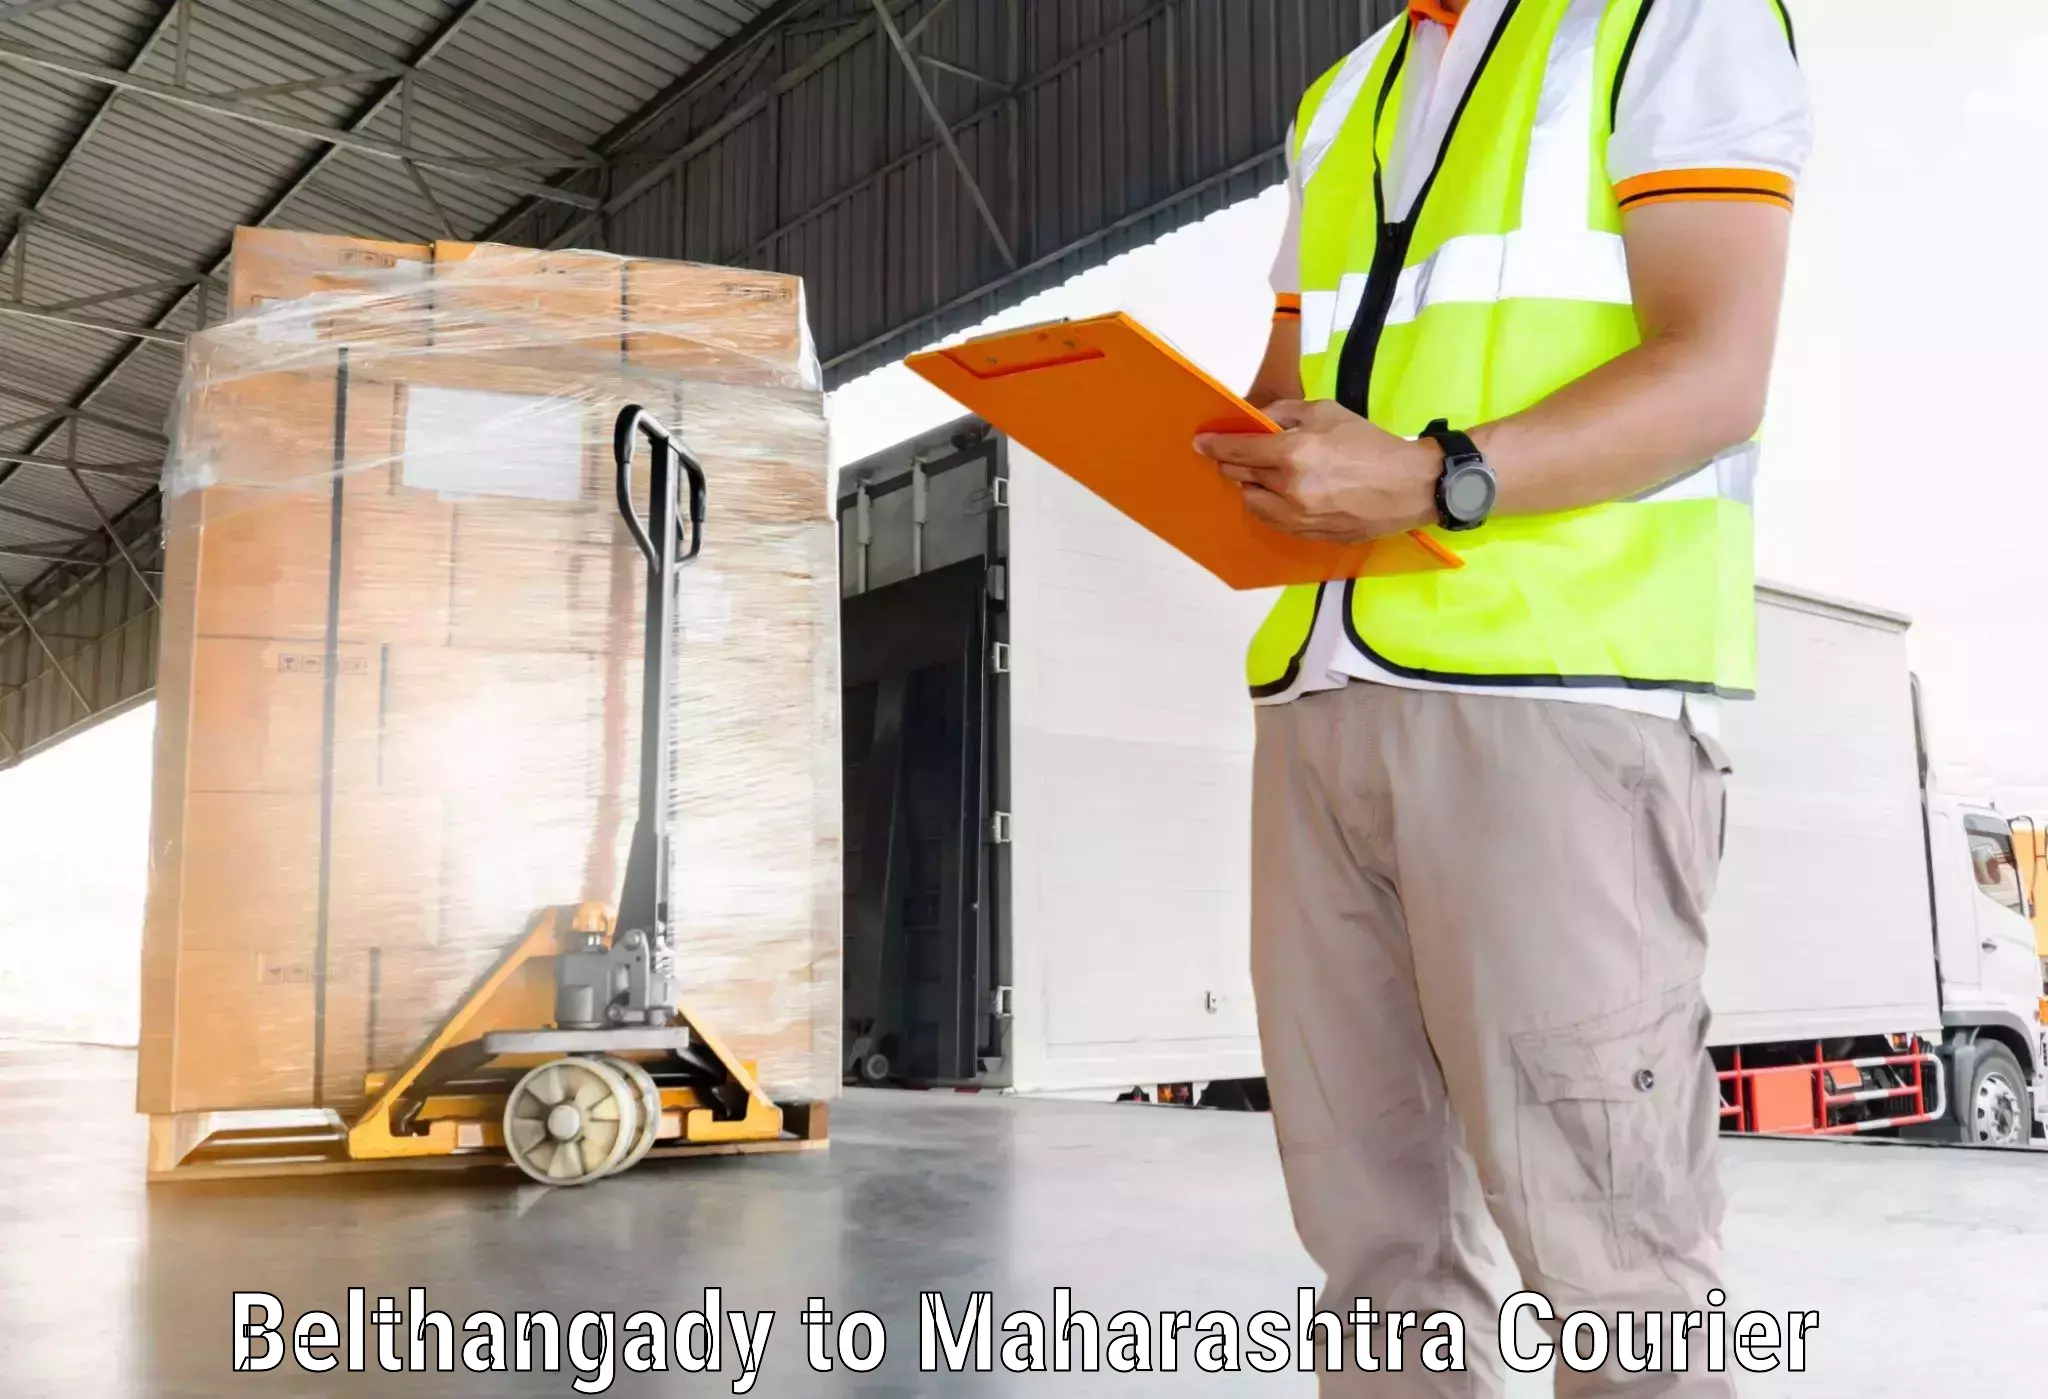 Easy access courier services Belthangady to Alibag